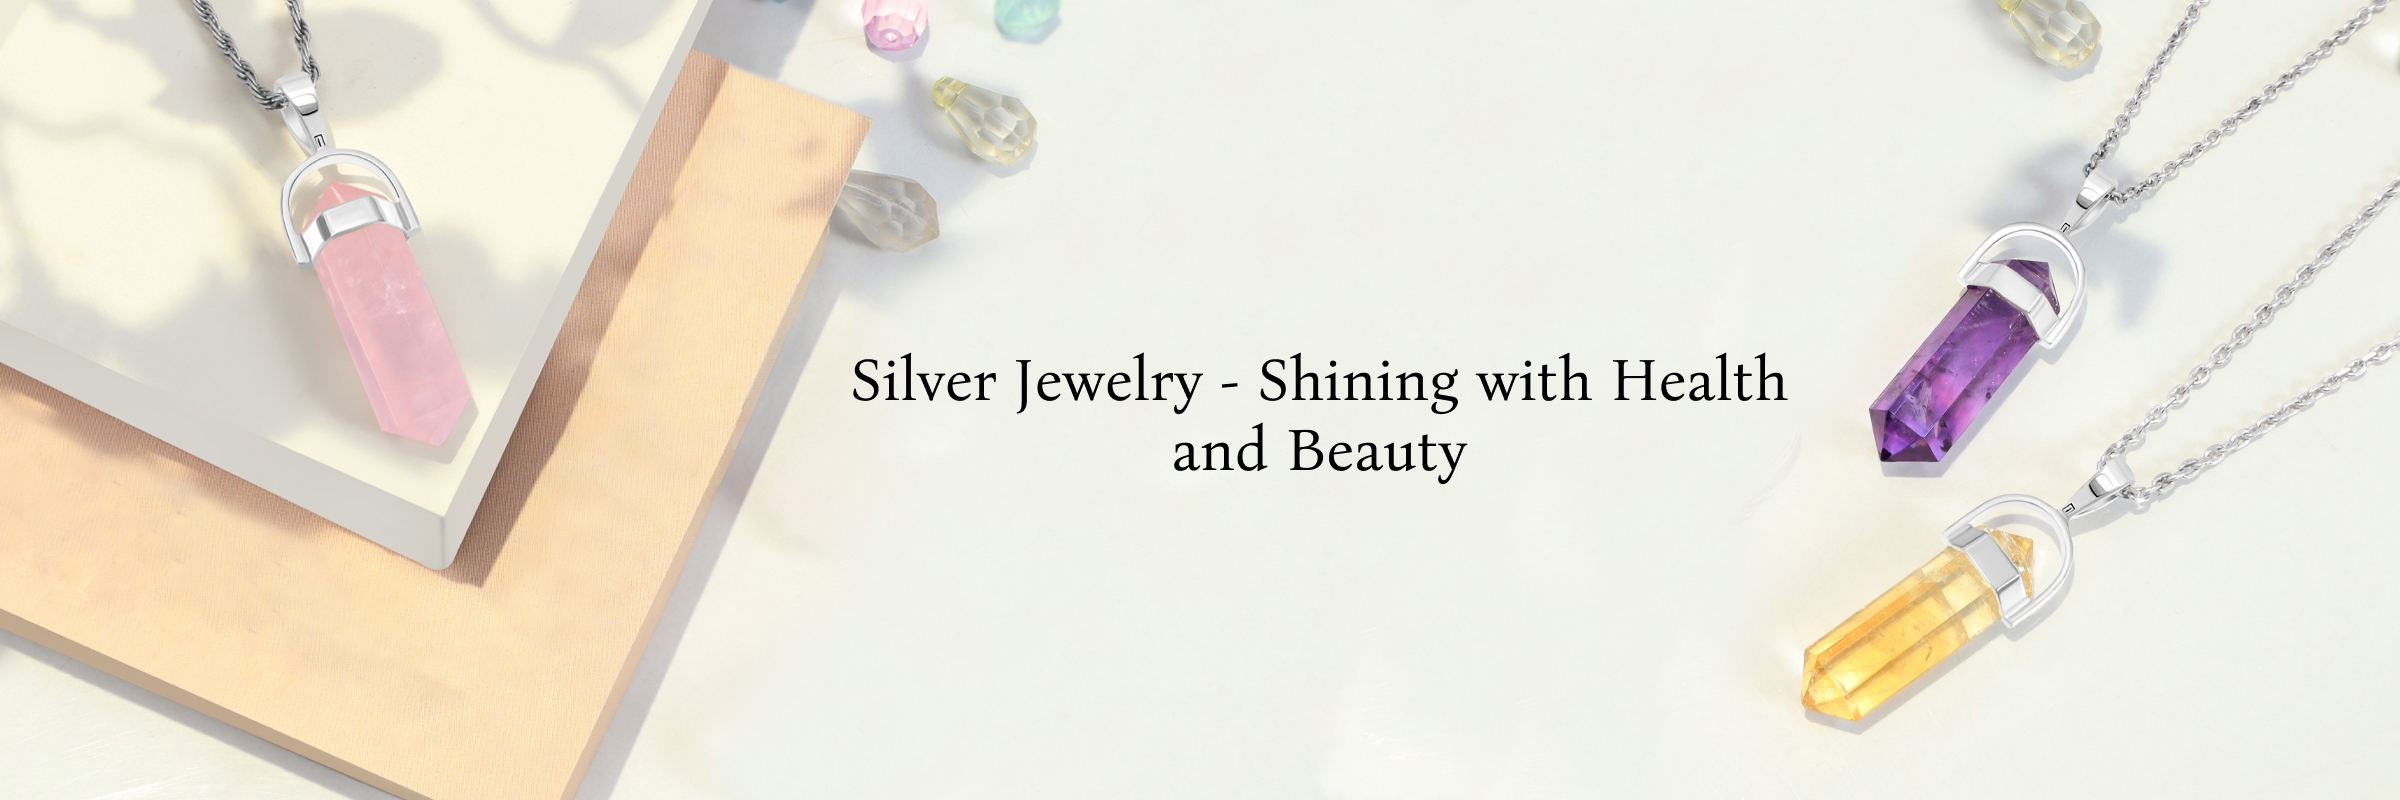 What are benefits of wearing Silver Jewelry